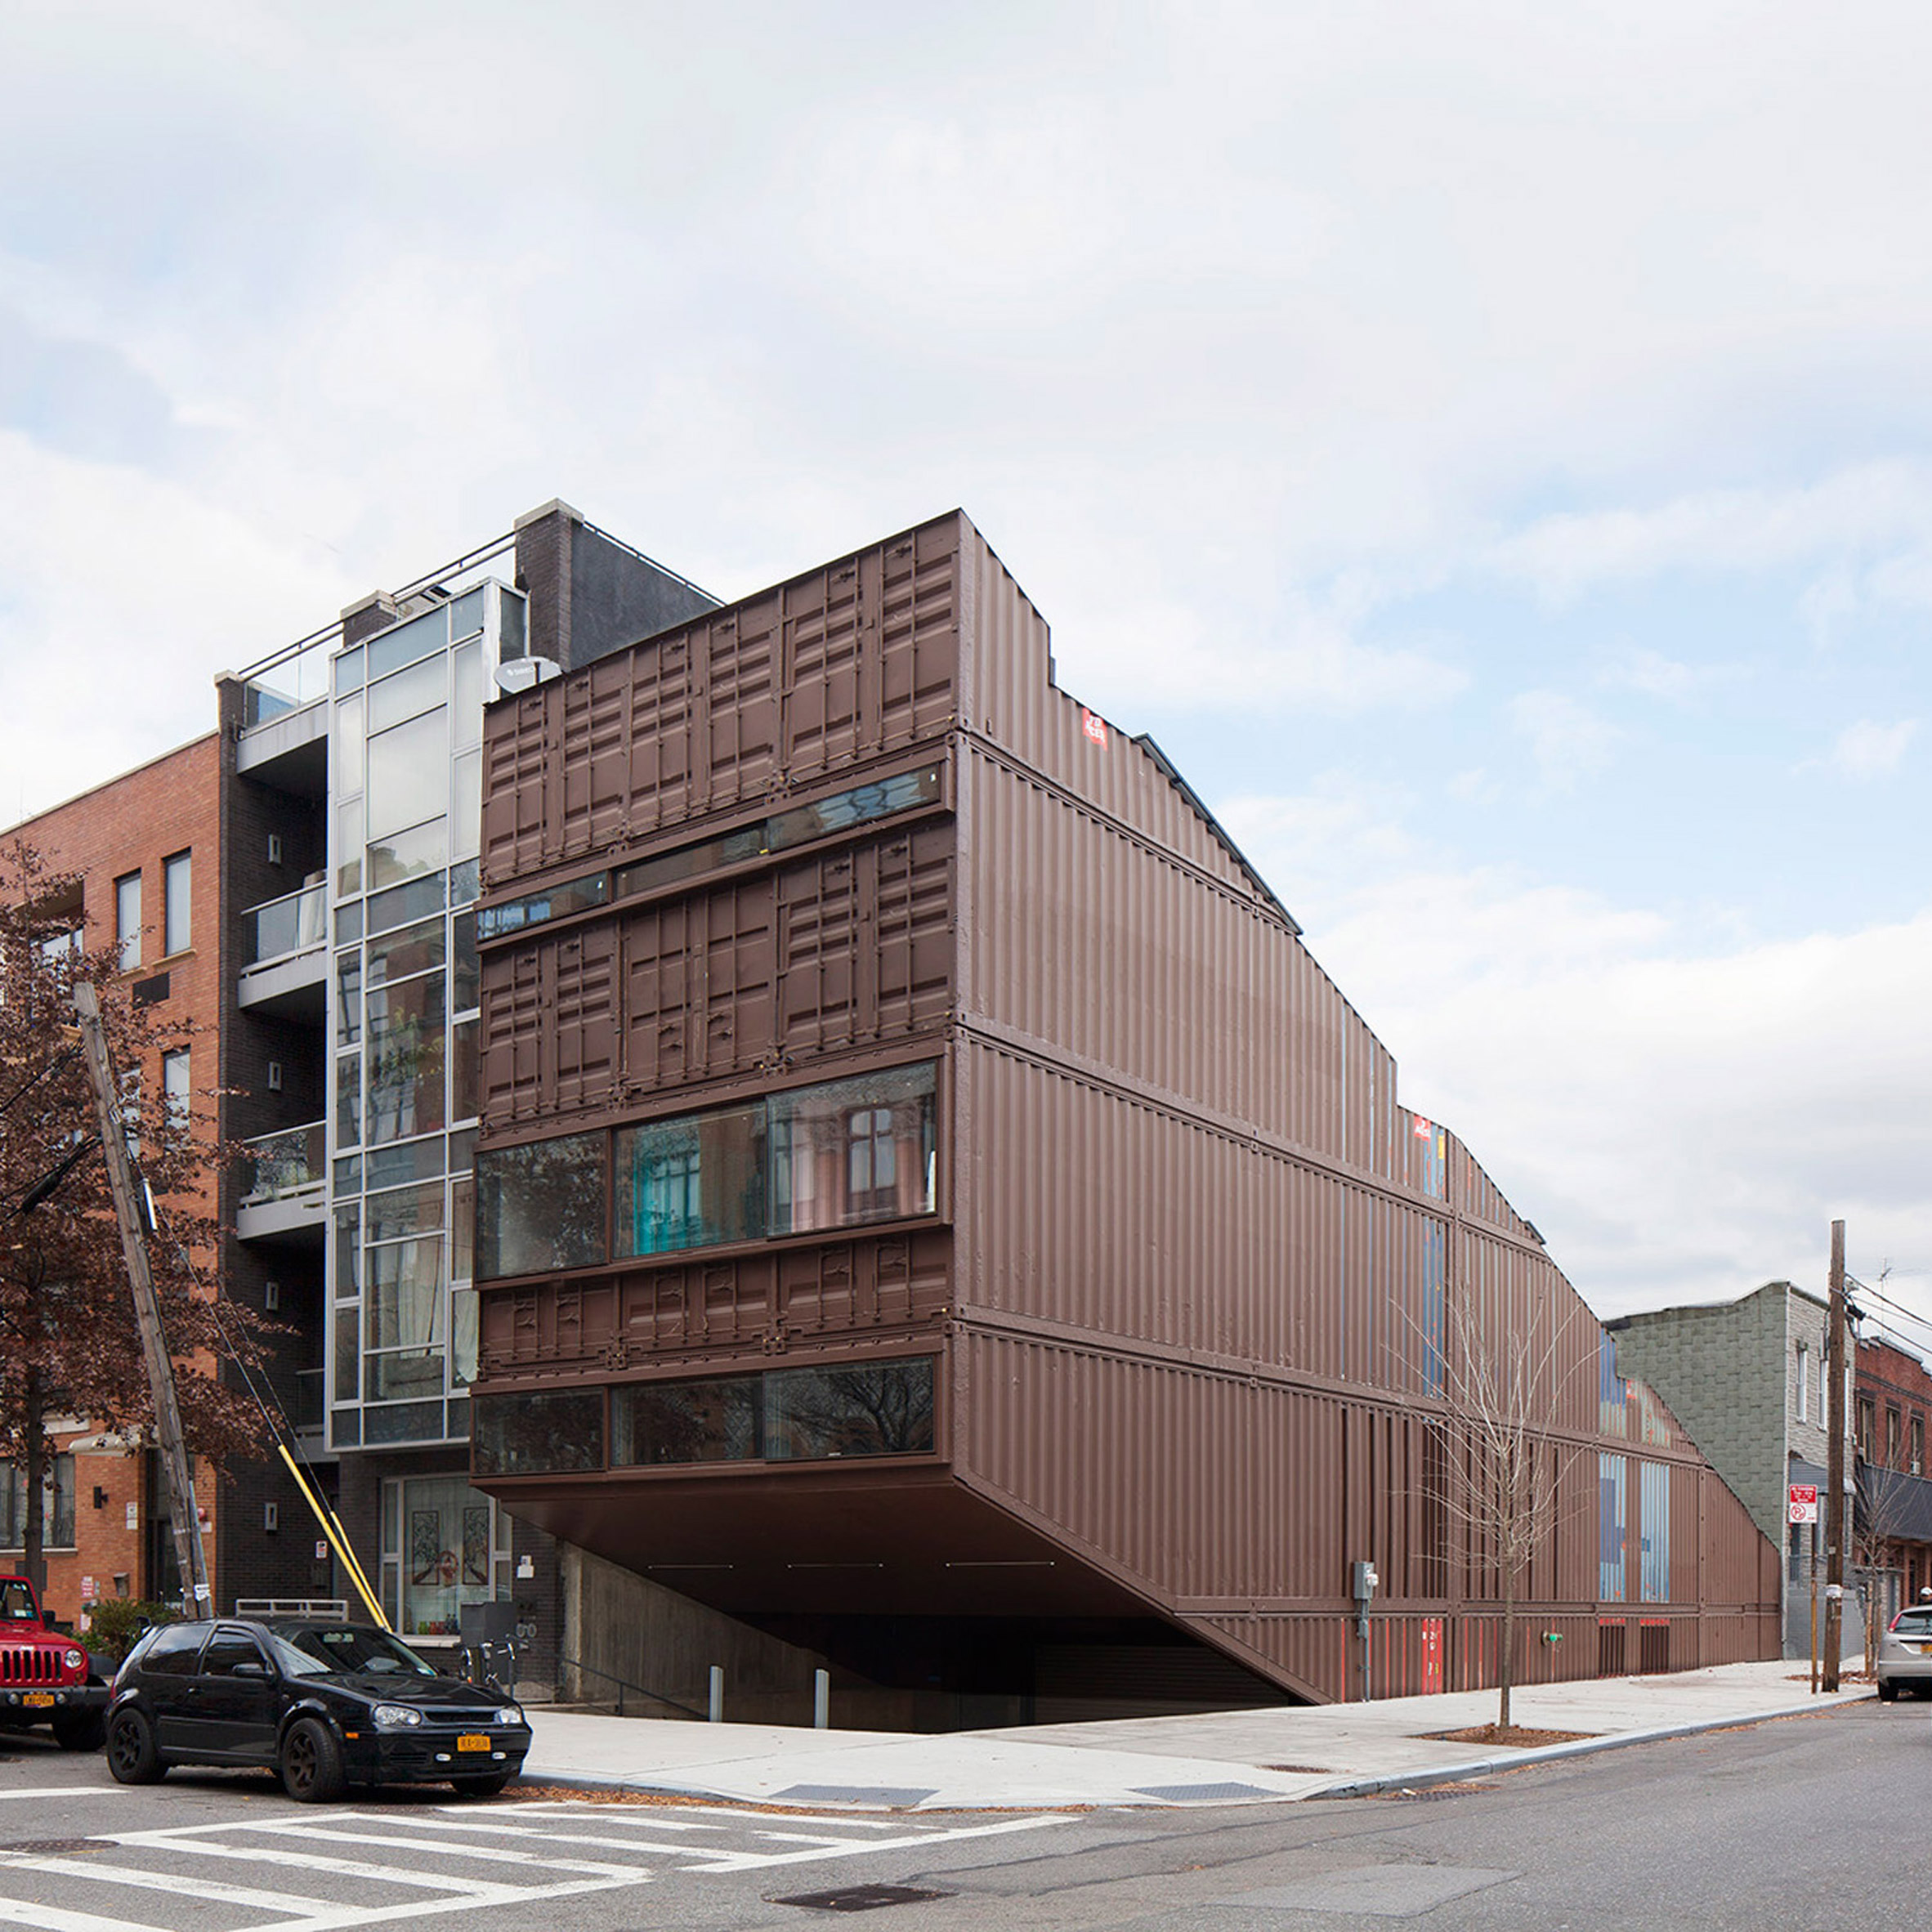 LOT-EK slices shipping-container stack to form Williamsburg home